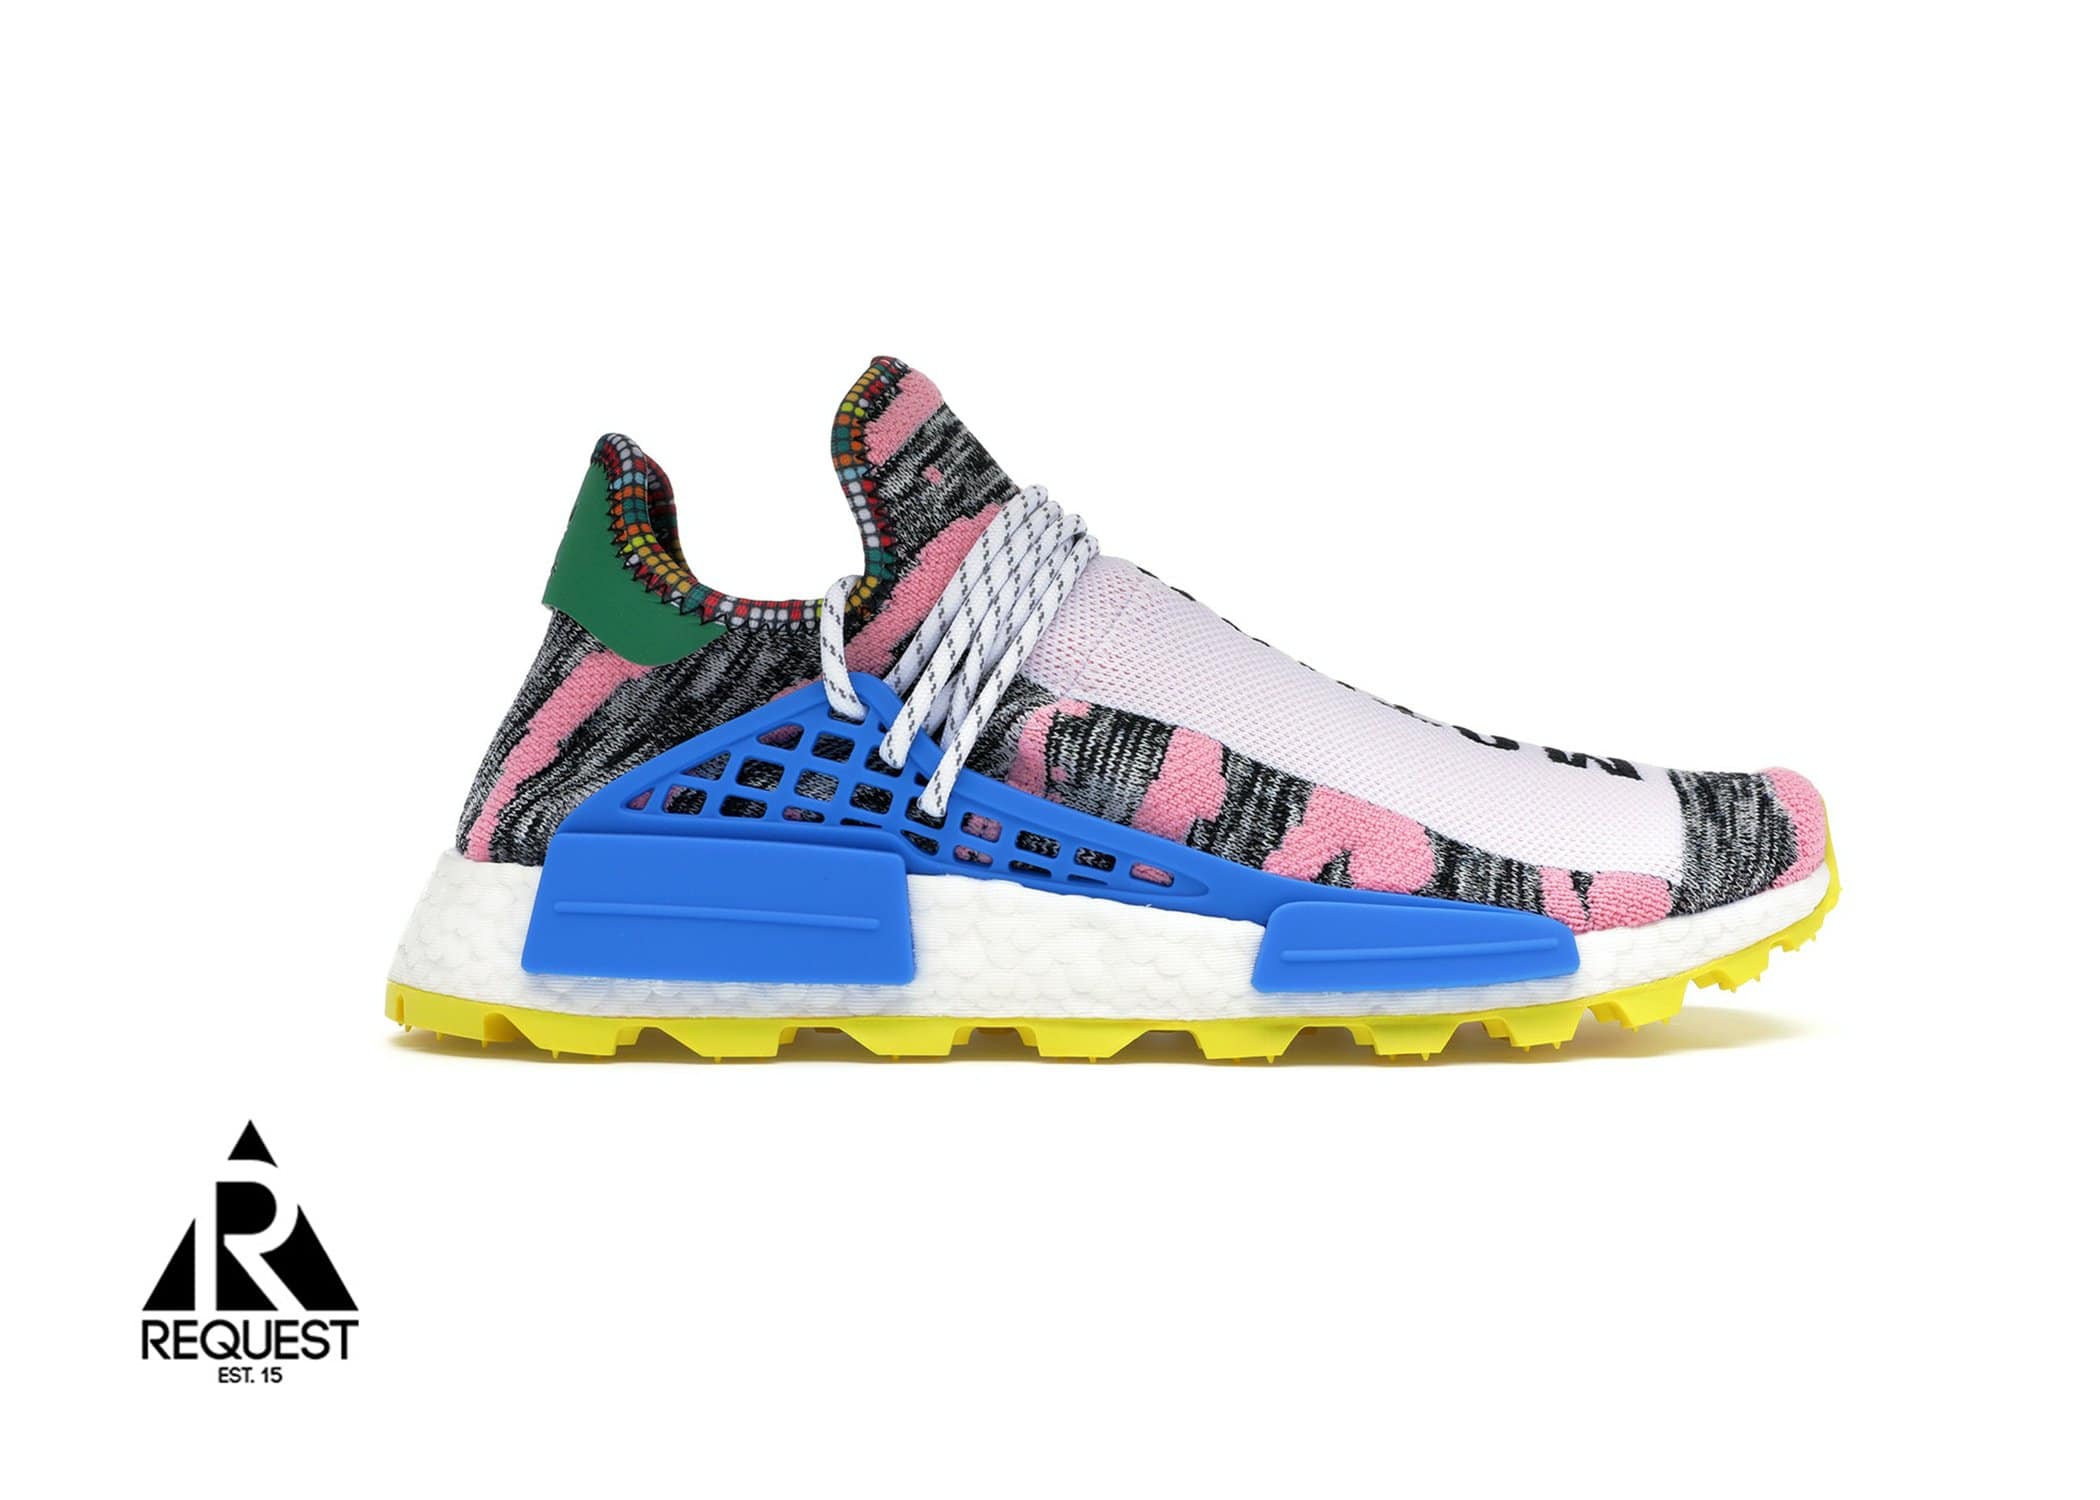 Adidas NMD Hu Solar Pack “Mother”